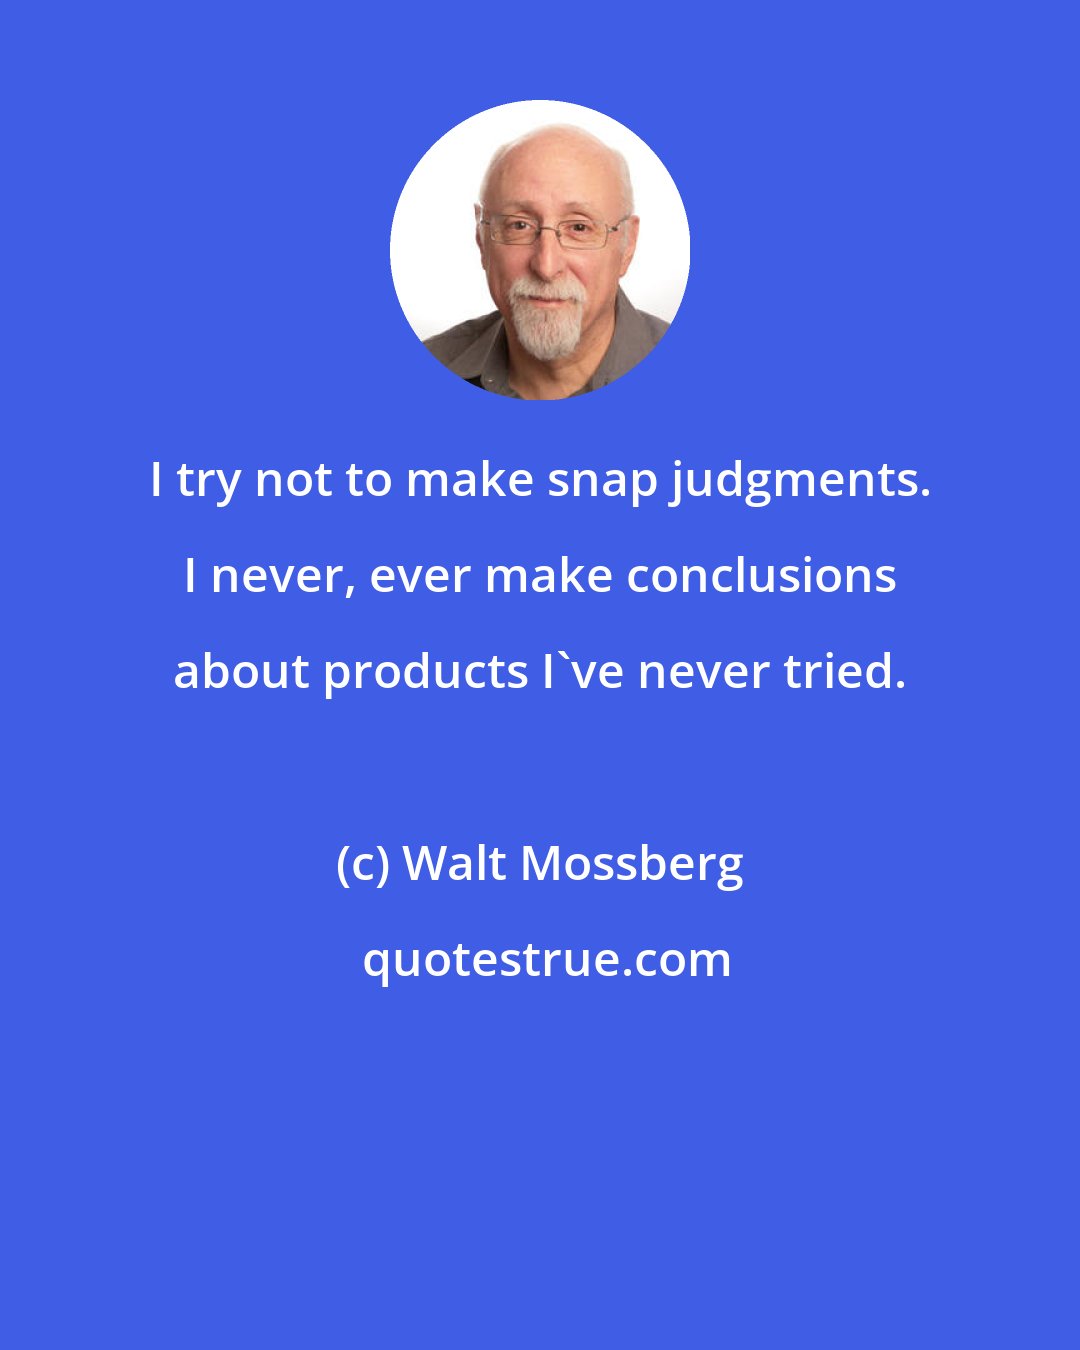 Walt Mossberg: I try not to make snap judgments. I never, ever make conclusions about products I've never tried.